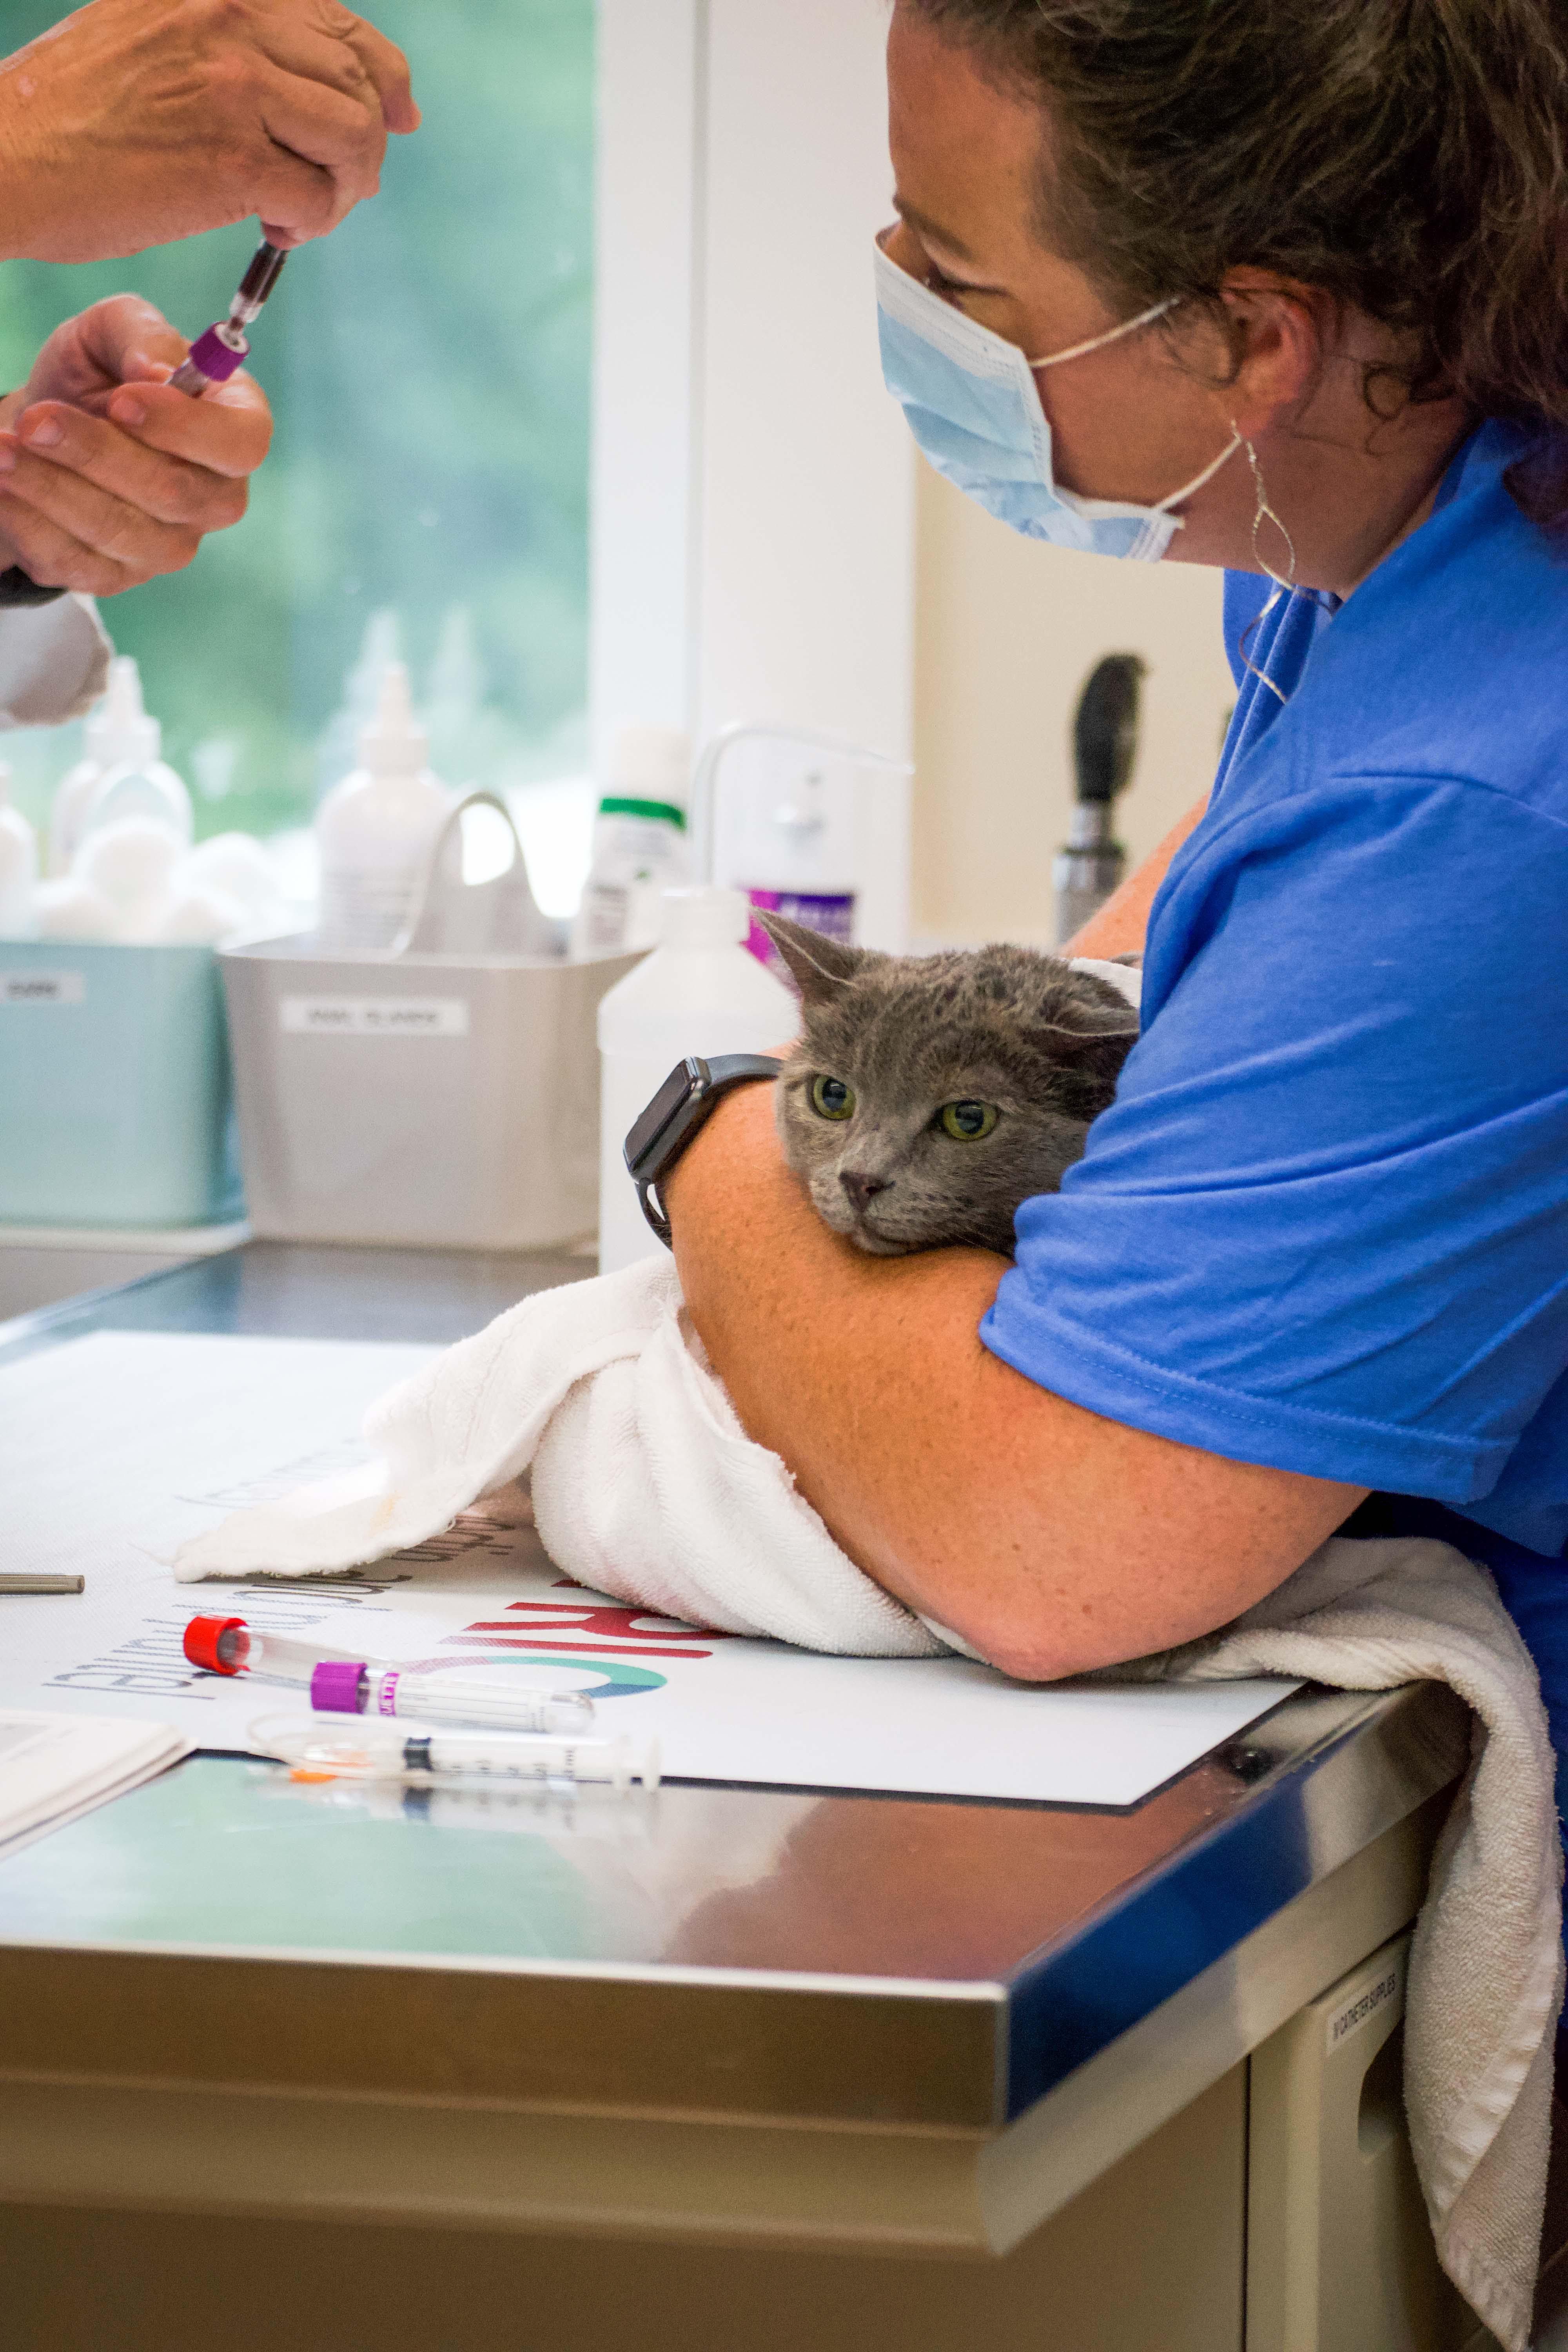 One of our friendly veterinary technicians cares for a patient in one of our exam rooms.